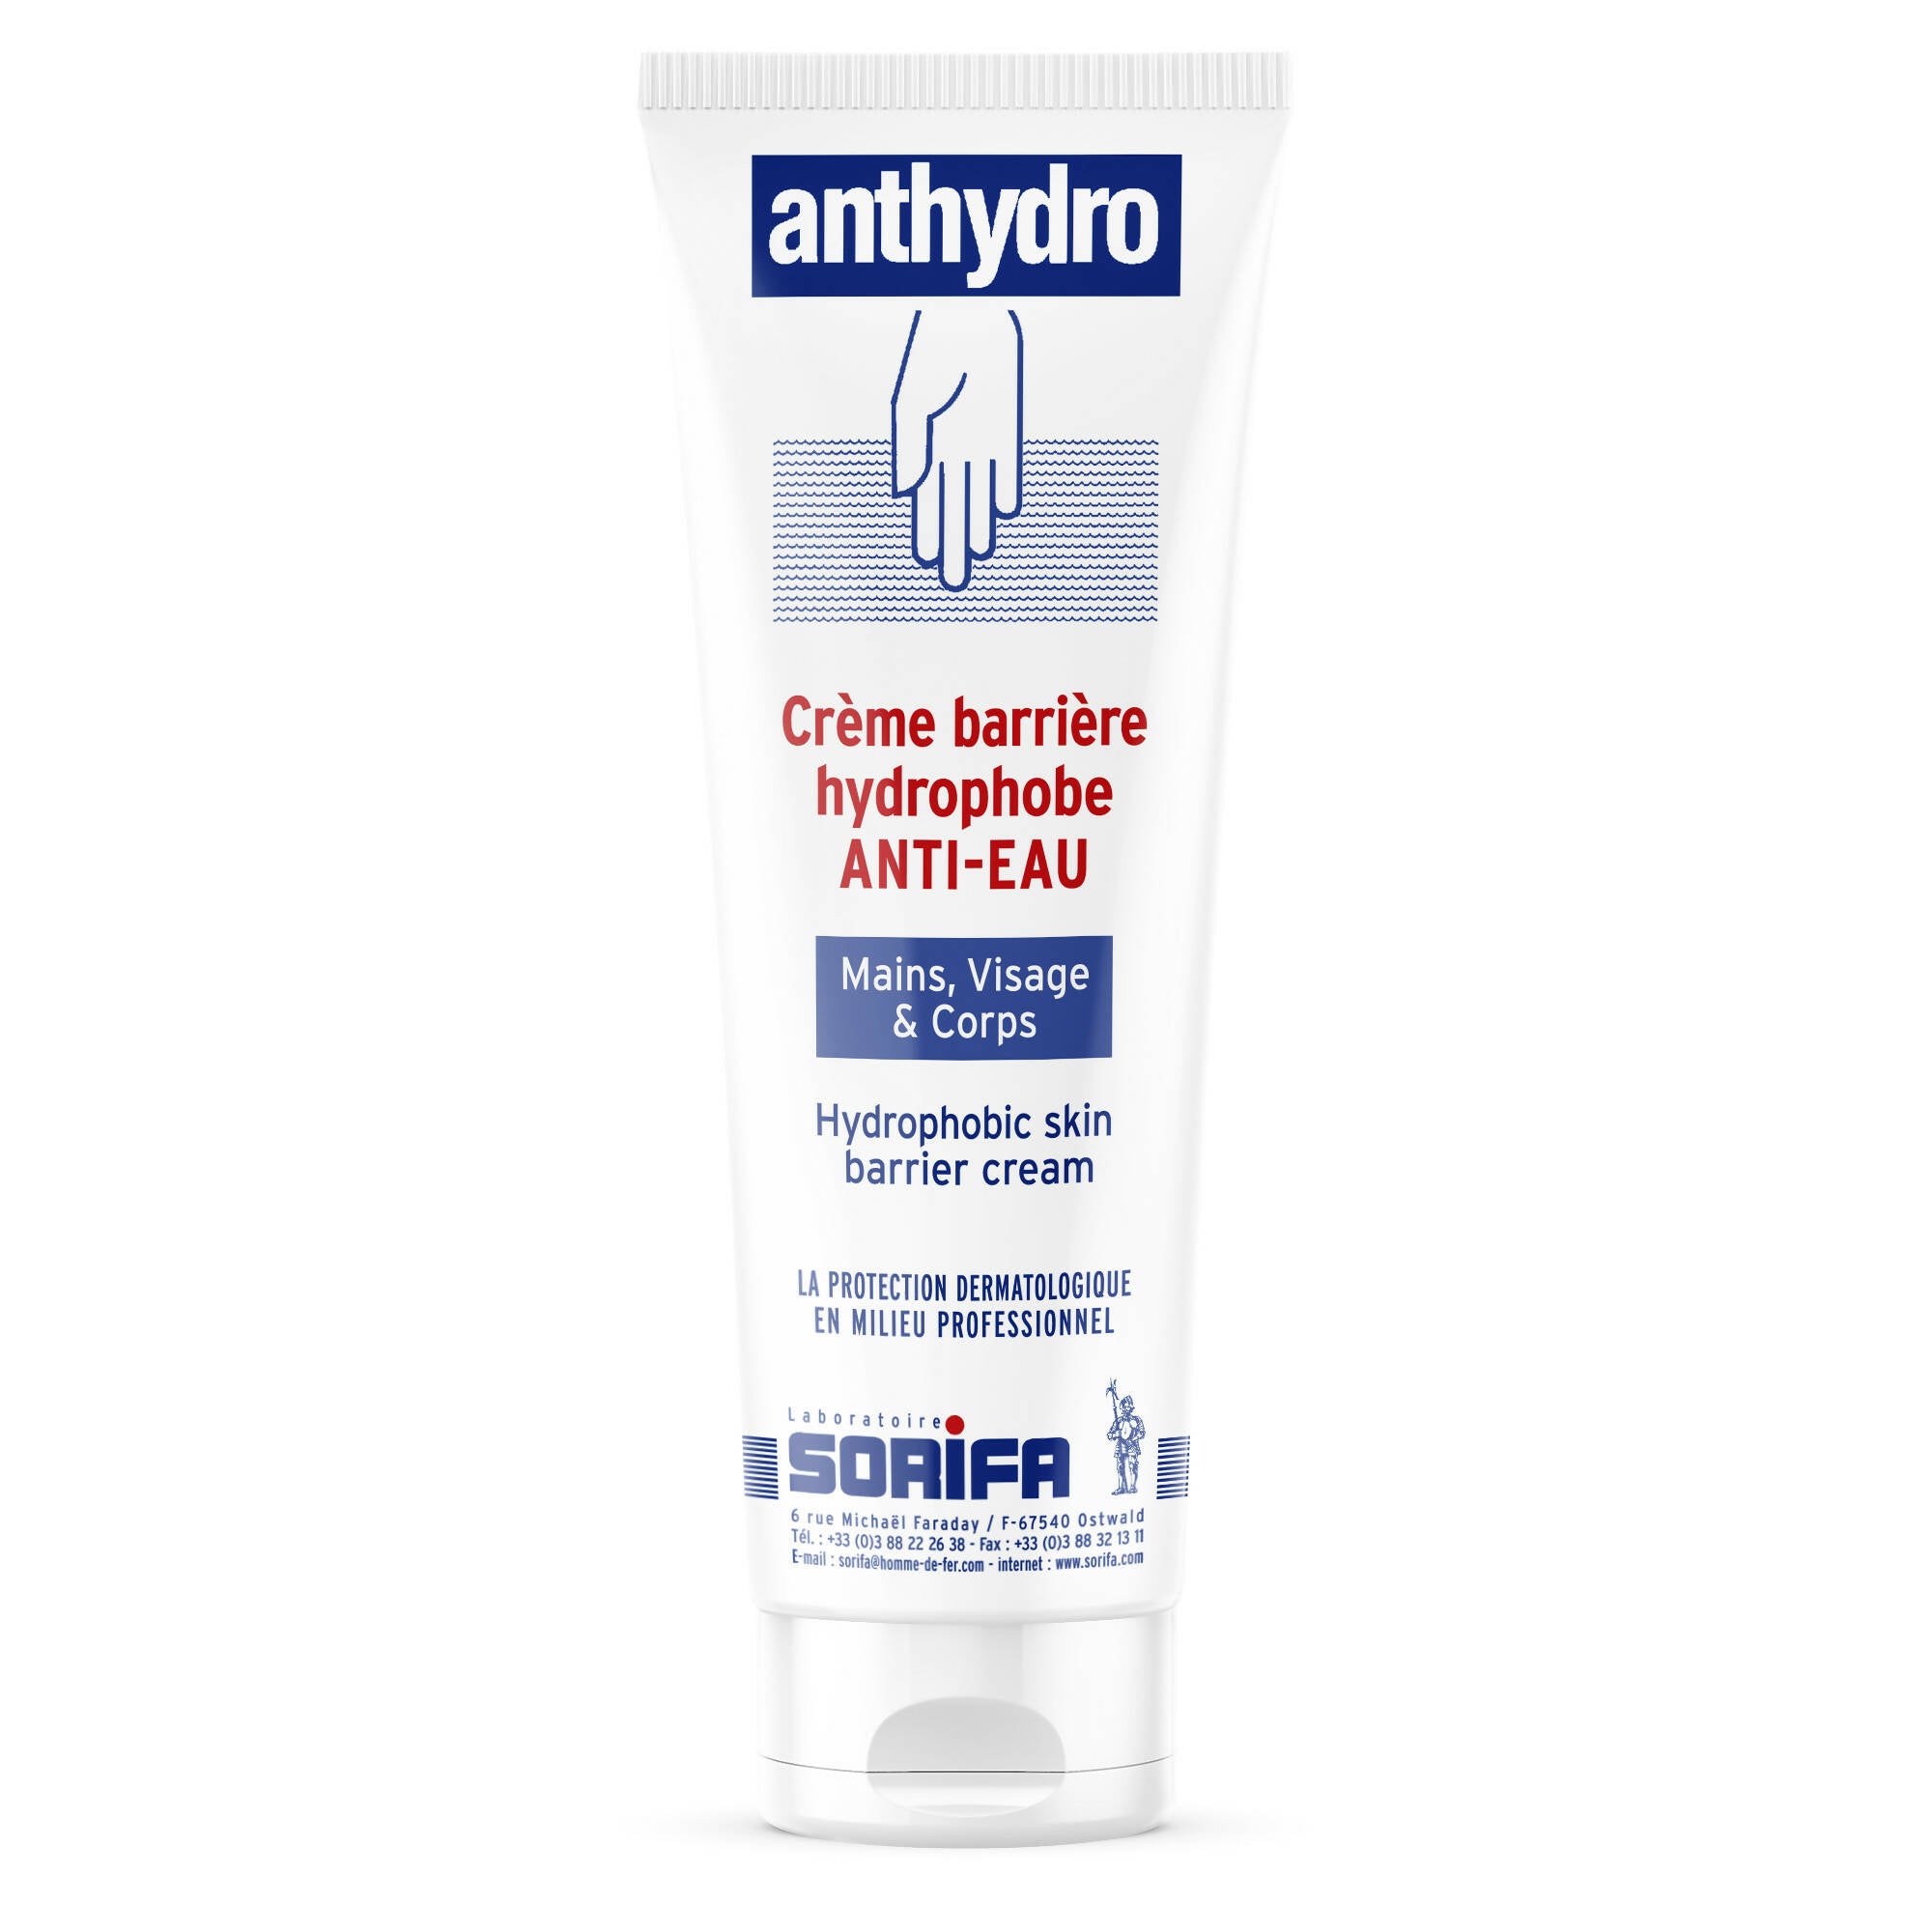 ANT001 - Anthydro Protection hydrophobe Tube 125ml recto